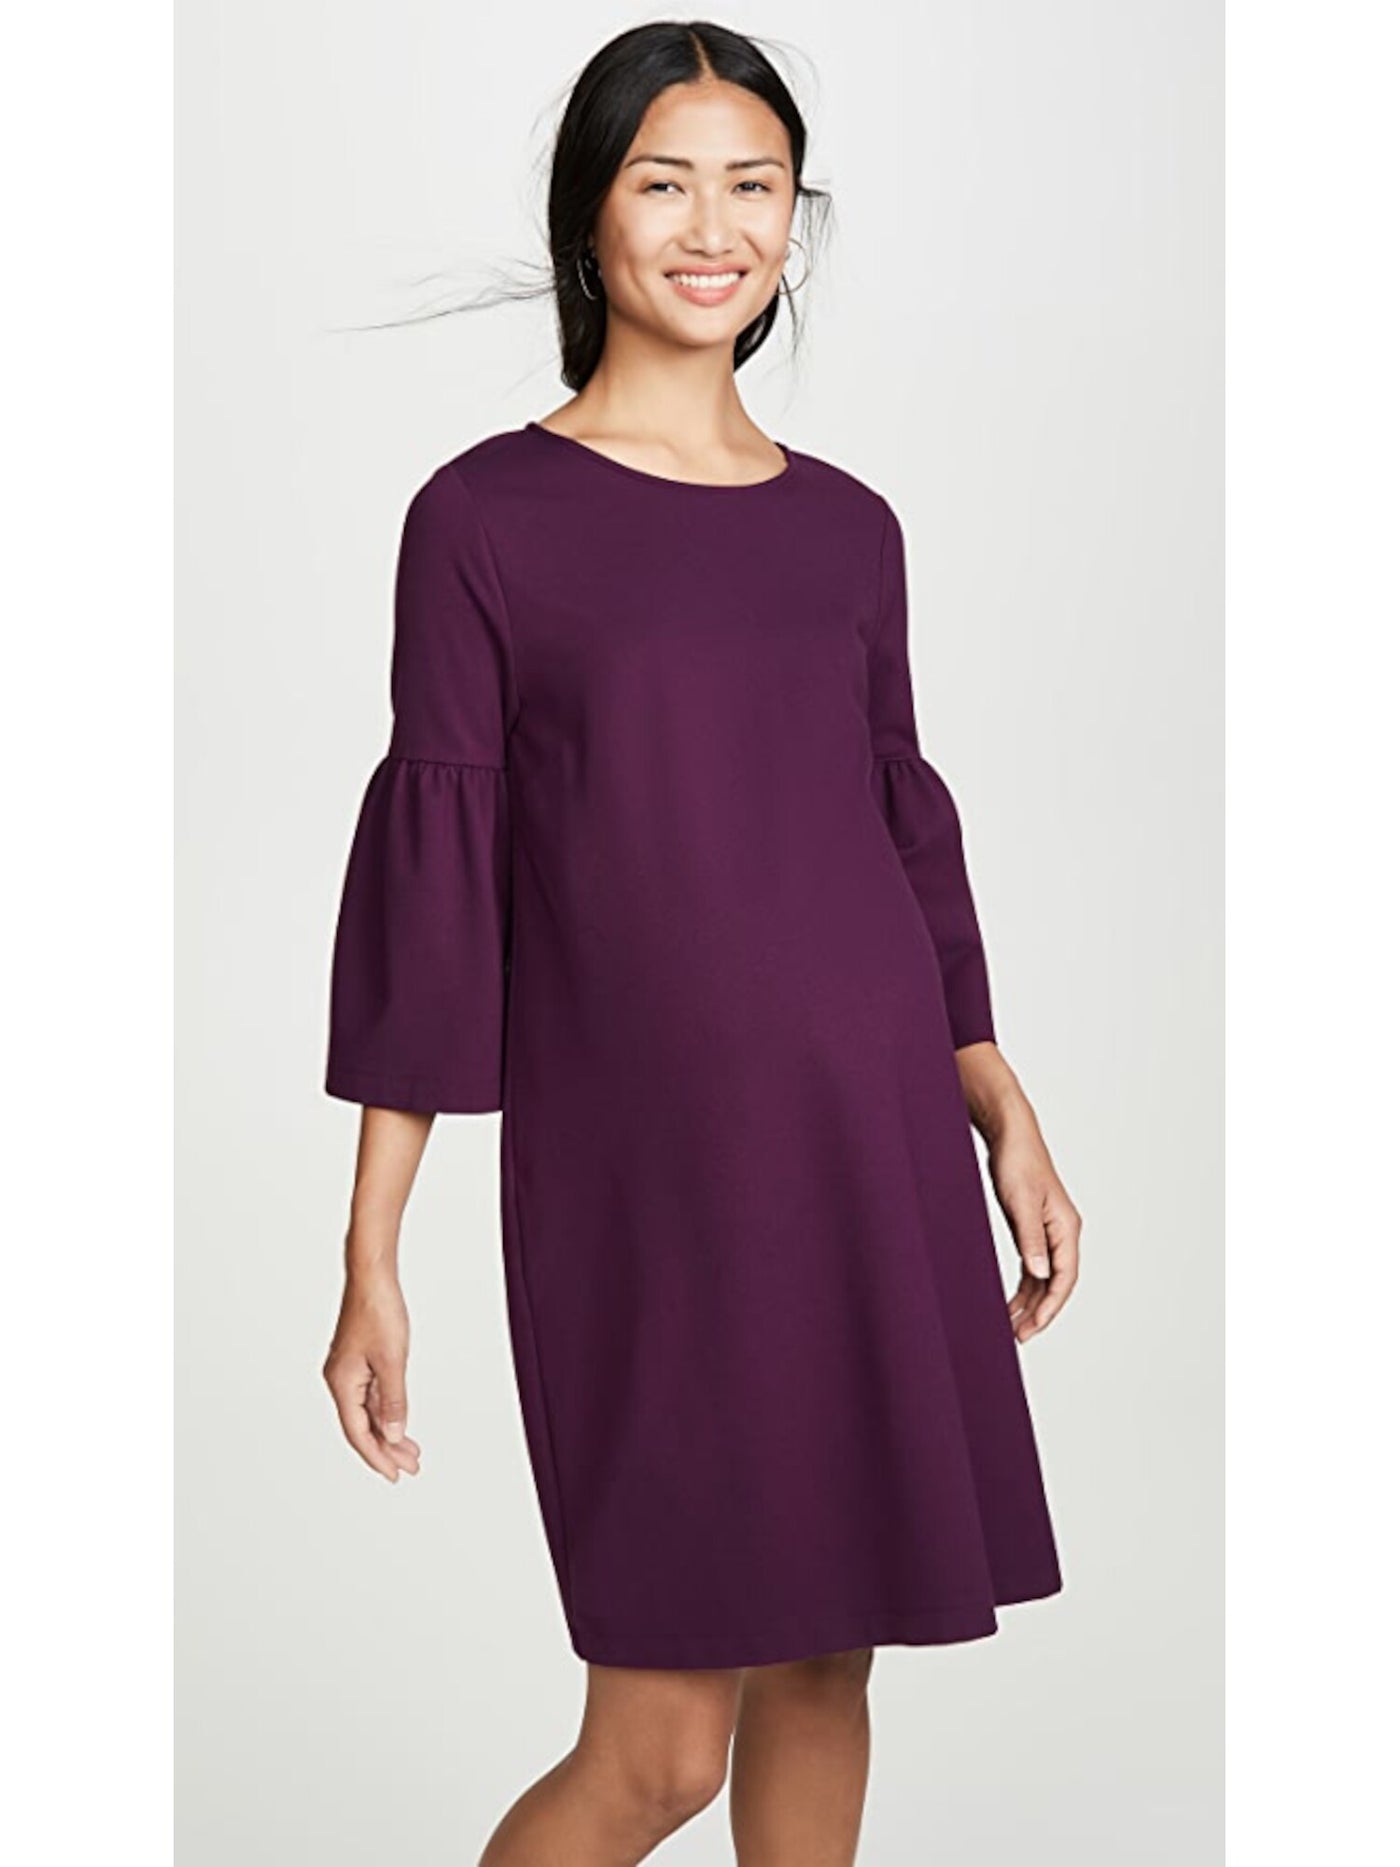 INGRID & ISABEL Womens Purple Knit Darted Bell Sleeve Jewel Neck Above The Knee Shift Dress Maternity XS